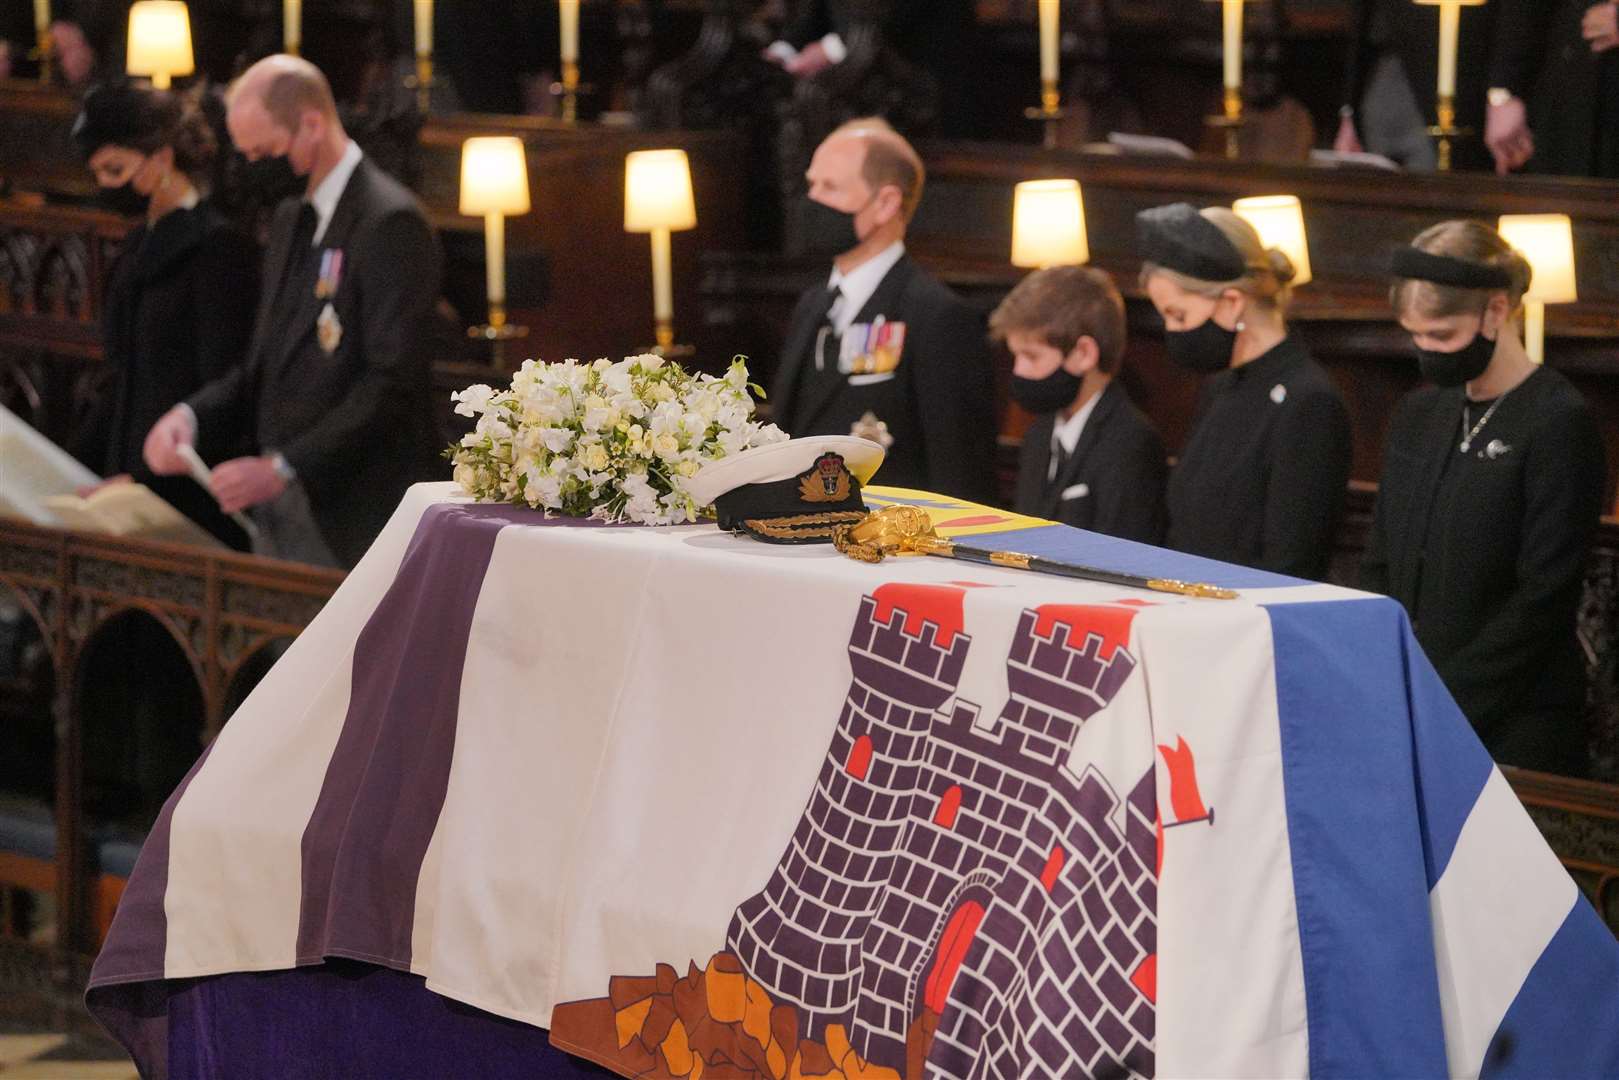 Mourners, including, front row, from left, the Duchess of Cambridge, the Duke of Cambridge, the Earl of Wessex, Viscount Severn, Lady Louise Mountbatten-Windsor, and the Countess of Wessex (Dominic Lipinski/PA)